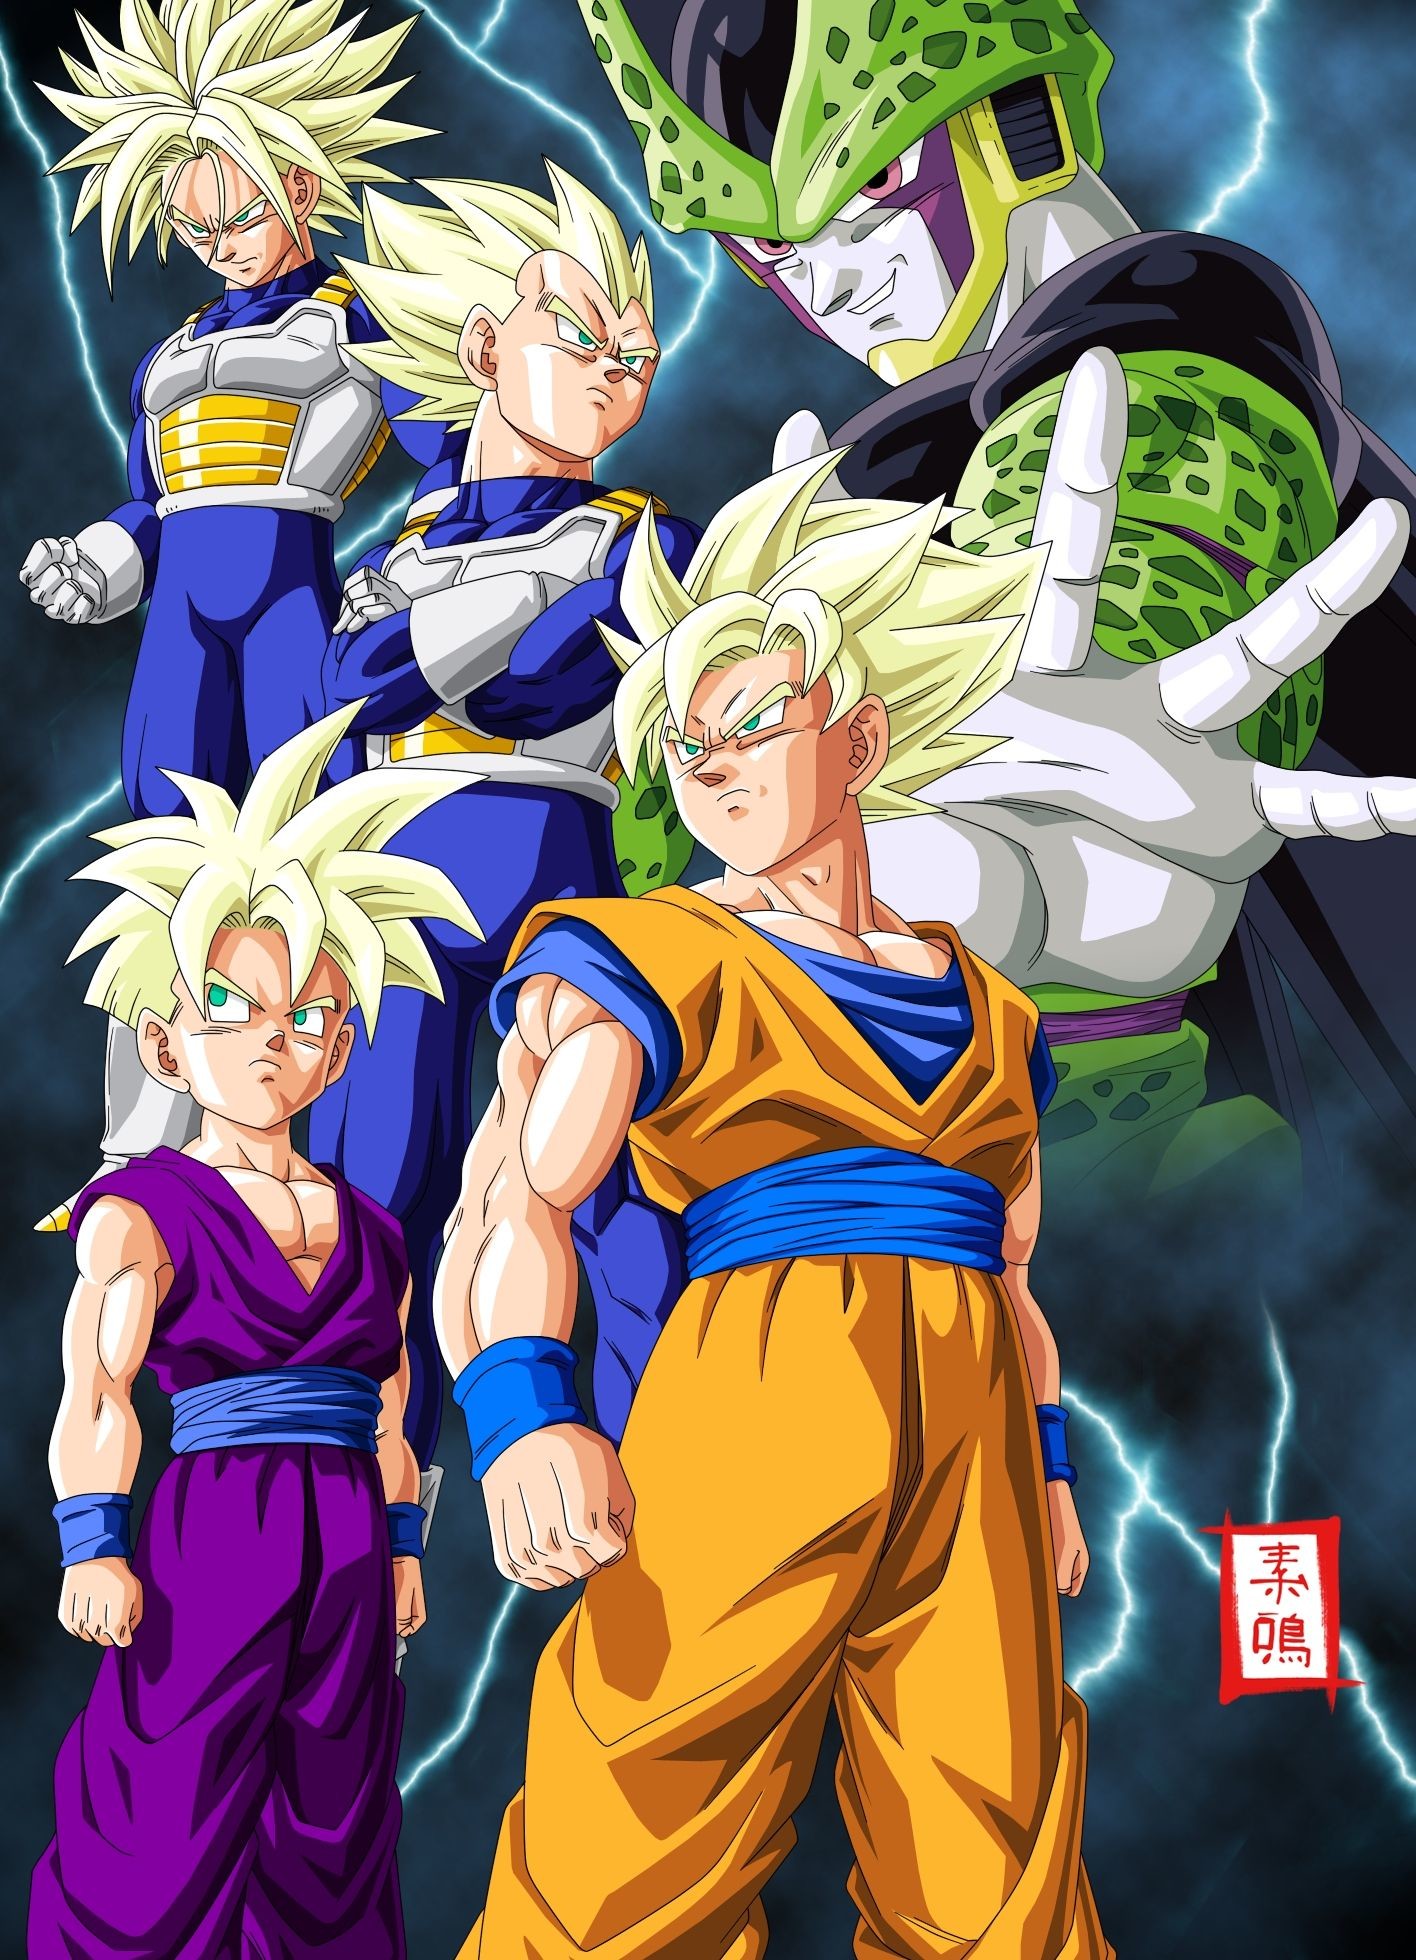 1416x1960 Download Wallpapers, Download 1280x800 vegeta cell son goku trunks .